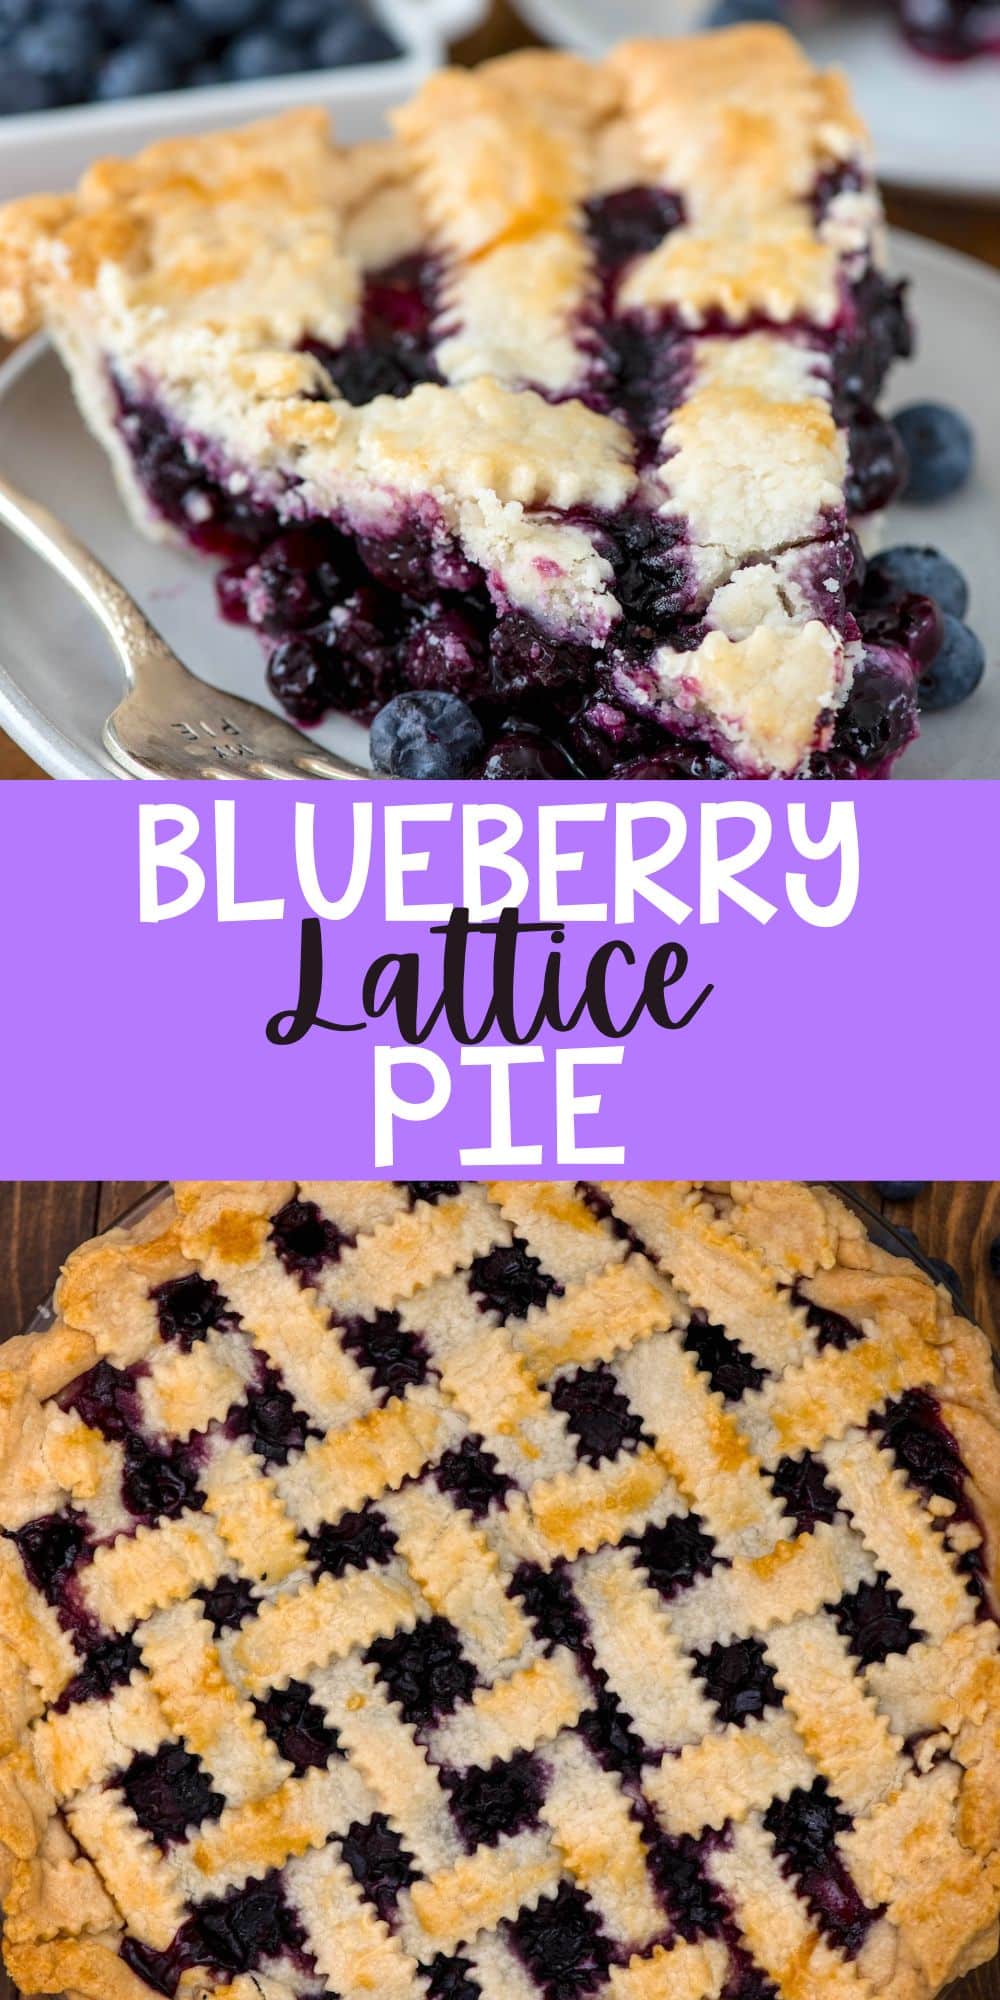 two photos of one slice of pie with blueberries baked in and with lattice design on top with words on the image.